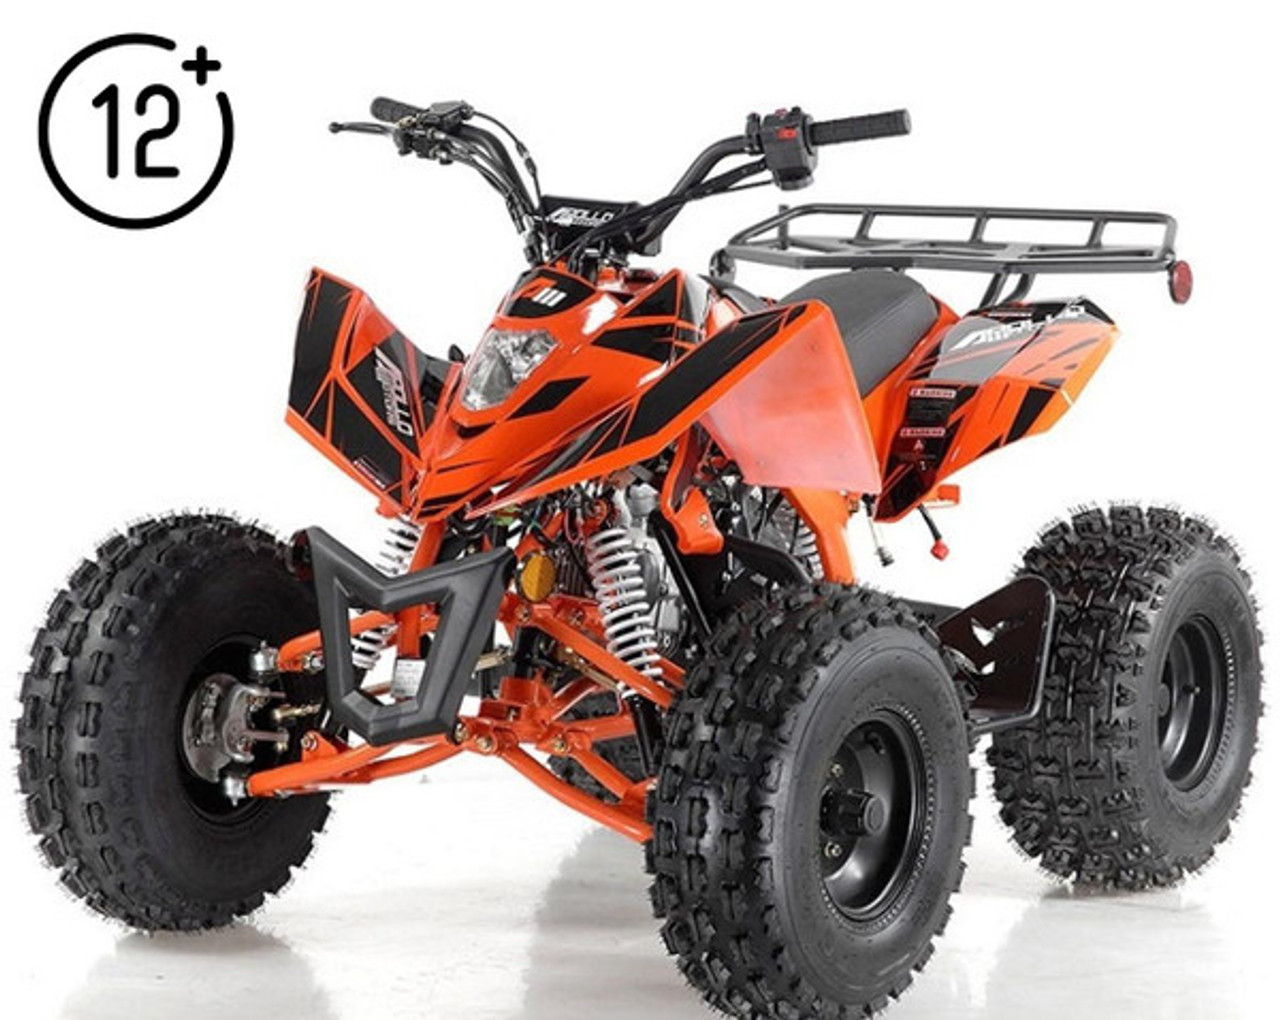 Apollo Sniper 125cc ATV, Single Cylinder, Air Cooled, 4 Stroke 1Speed+Reverse - Now with New Threads Tire Design &  Remote Kill